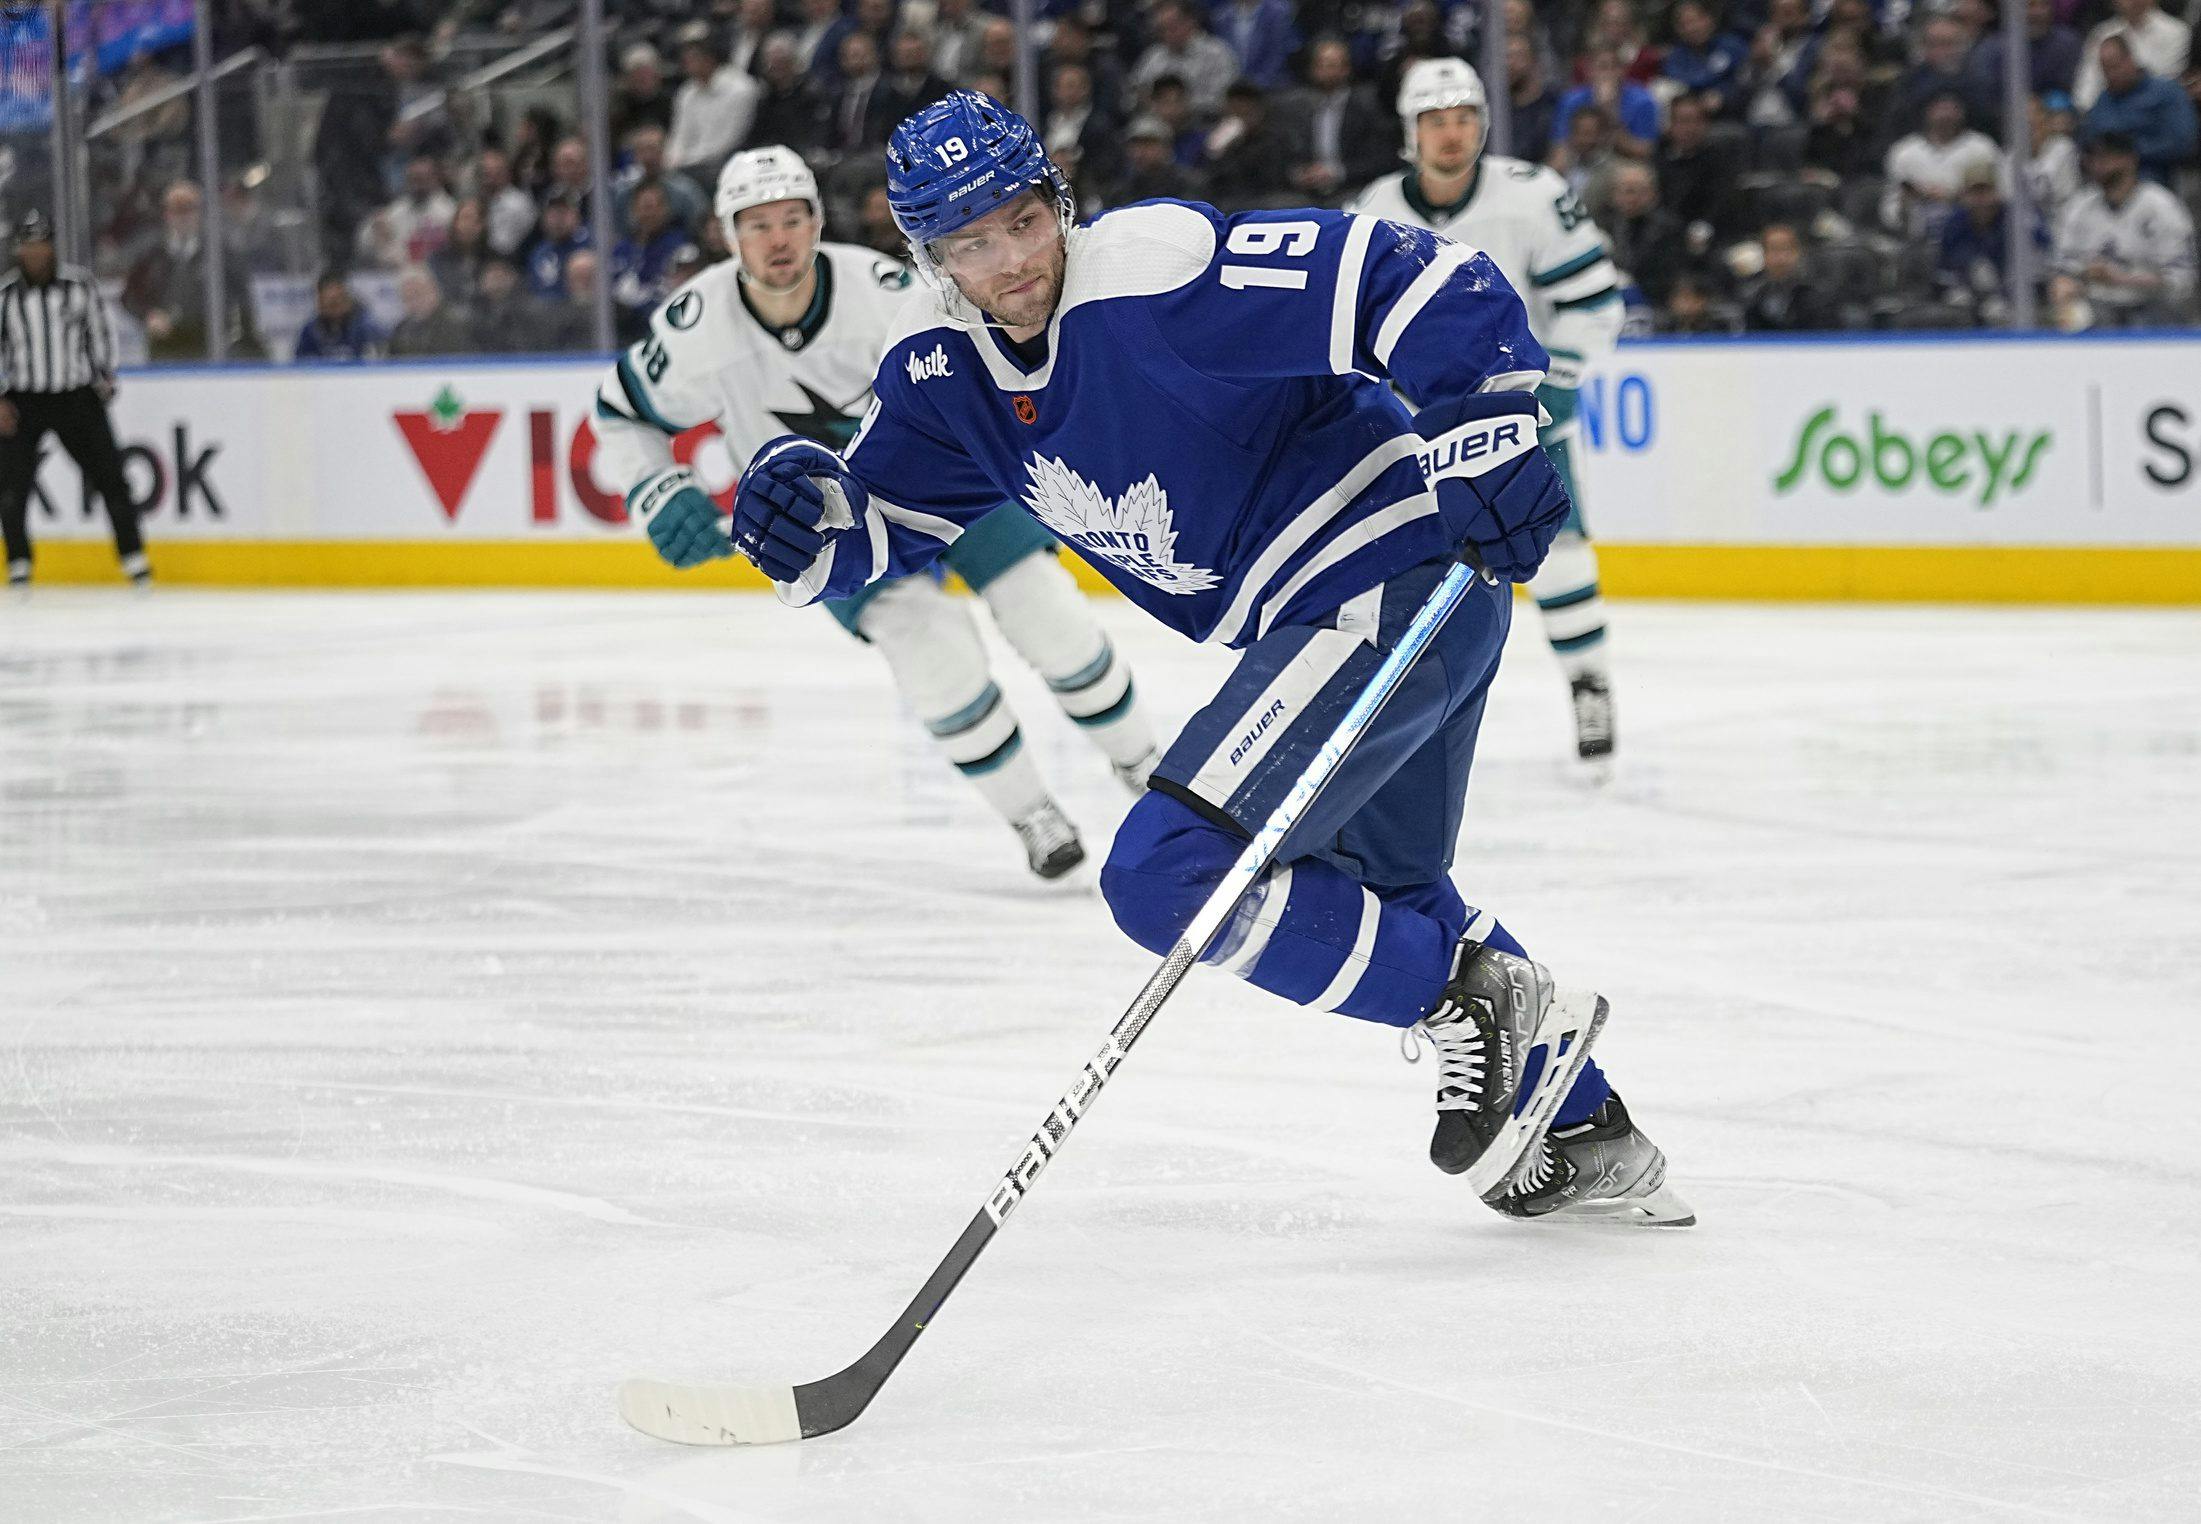 Toronto Maple Leafs forward Calle Jarnkrok leaves Wednesday’s game with groin injury